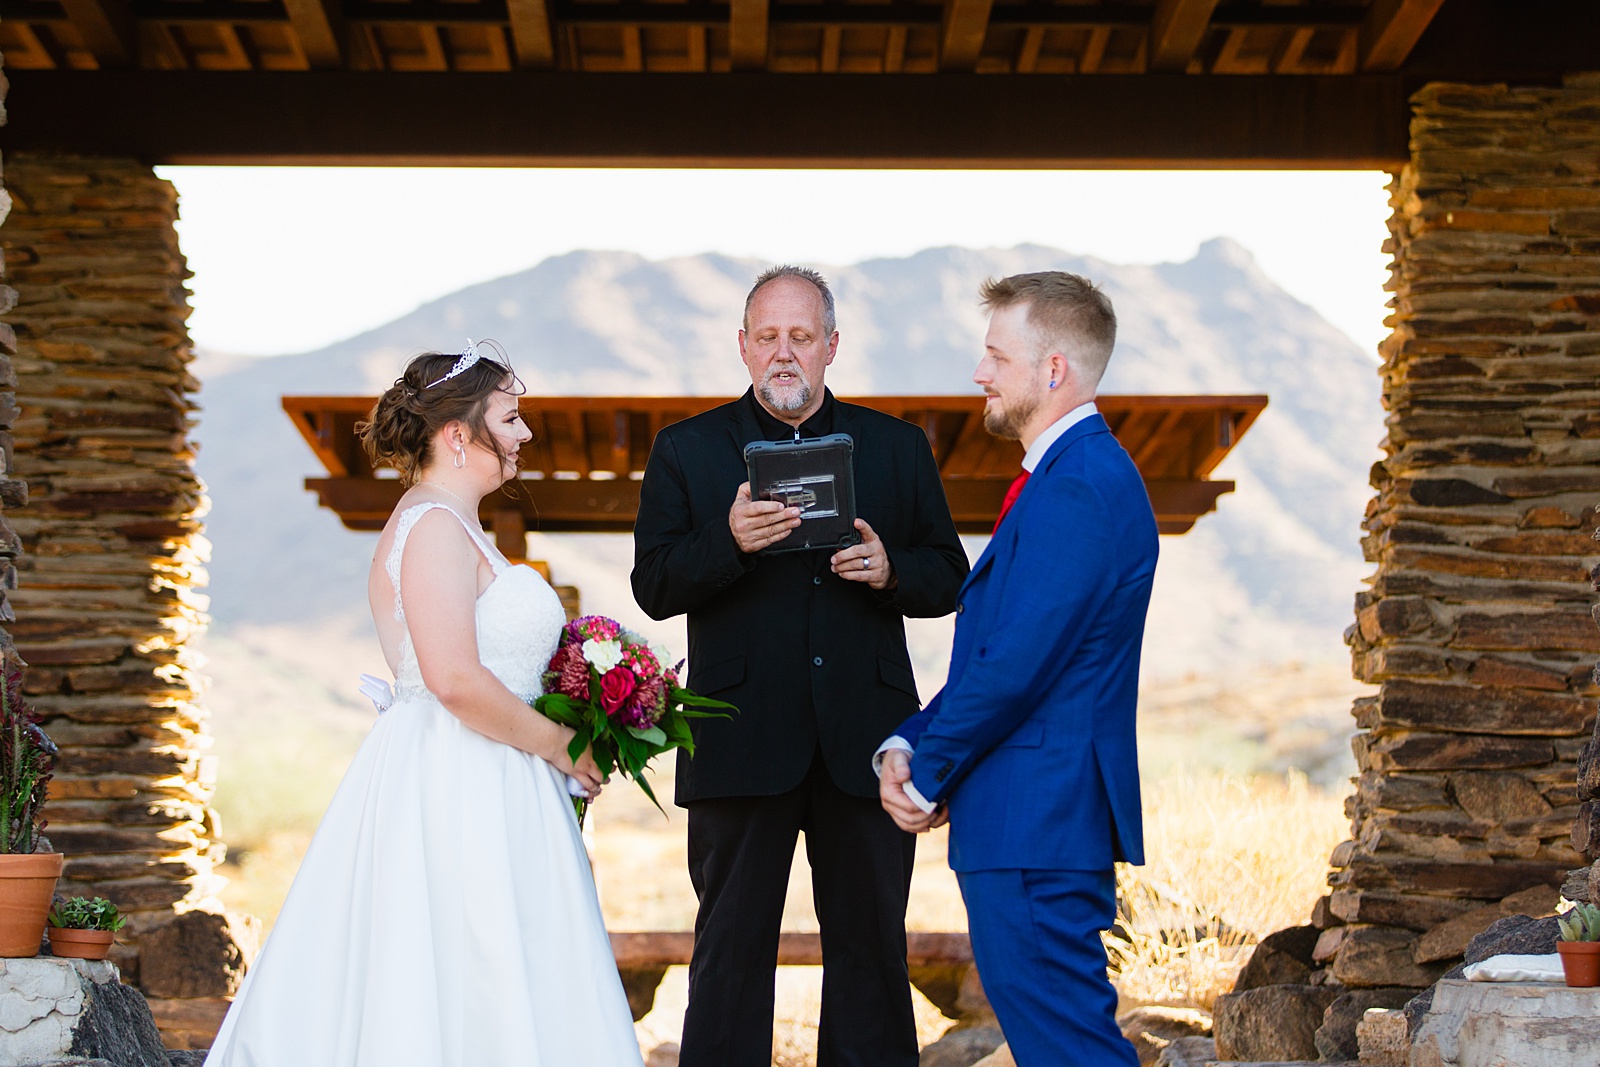 Wedding ceremony at intimate desert by Phoenix wedding photographer Juniper and Co Photography.